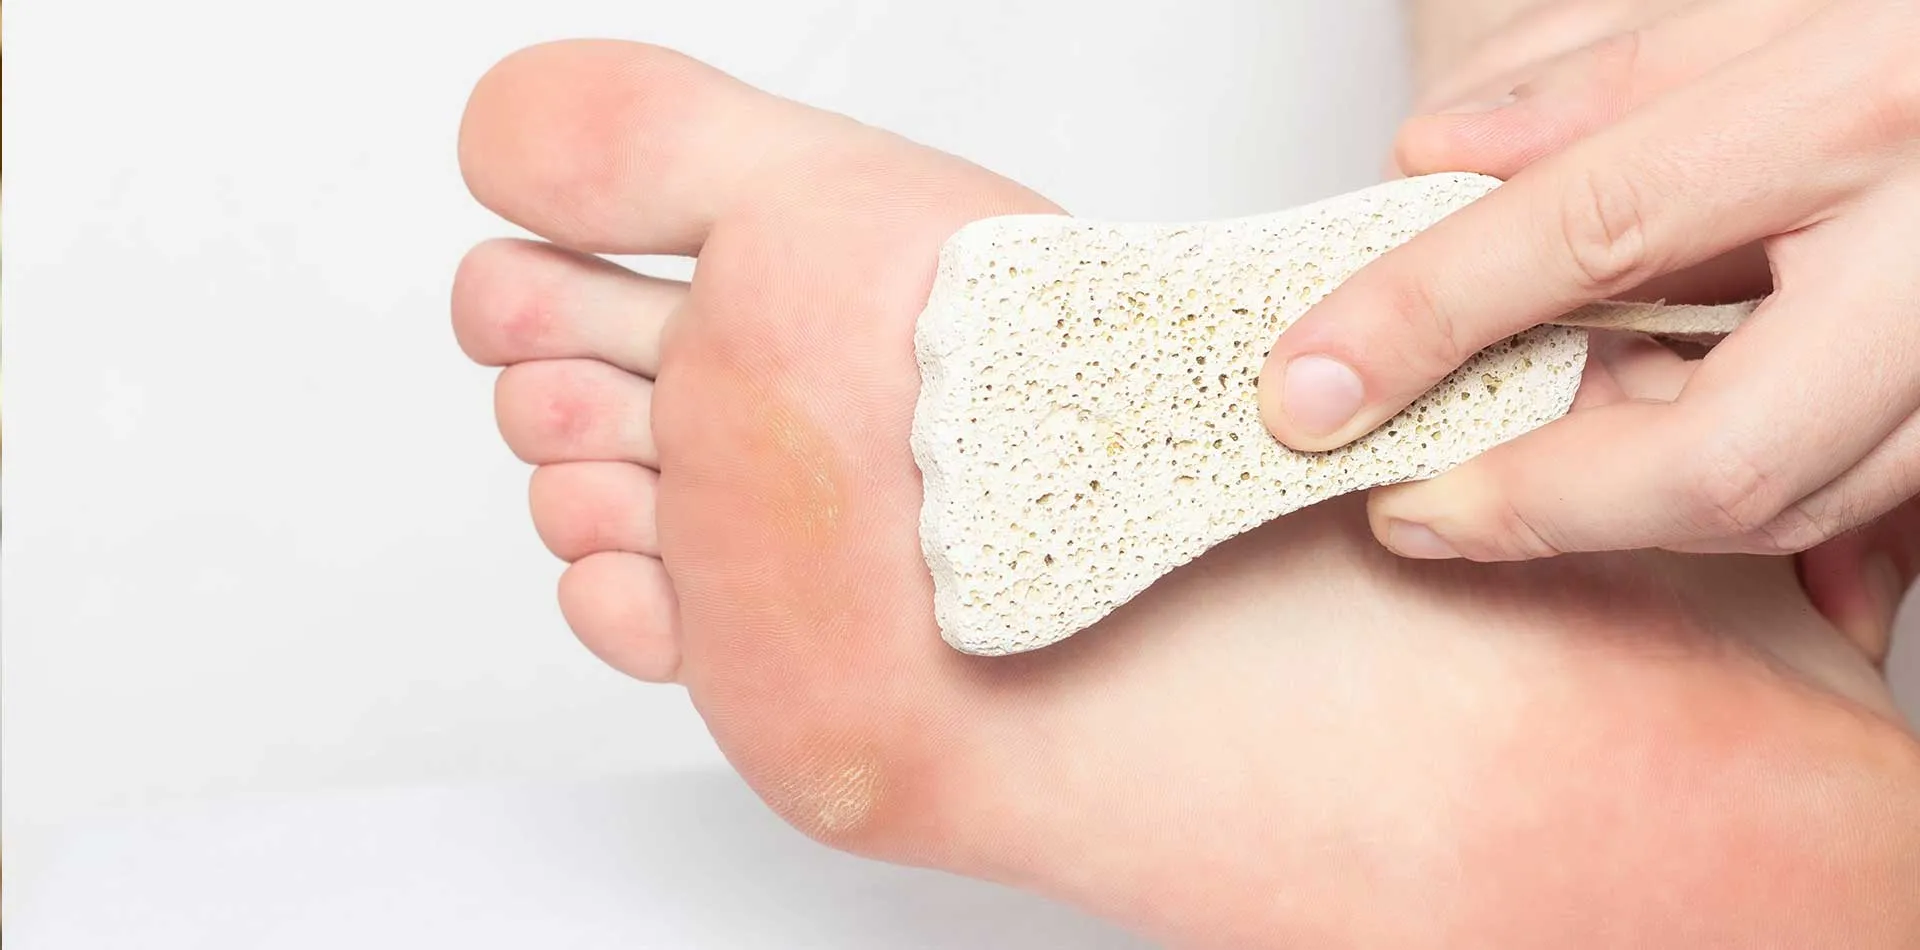 Foot Corns & Calluses Treatment / Removal in Singapore 2023 - Singapore  Sports And Orthopaedic Clinic